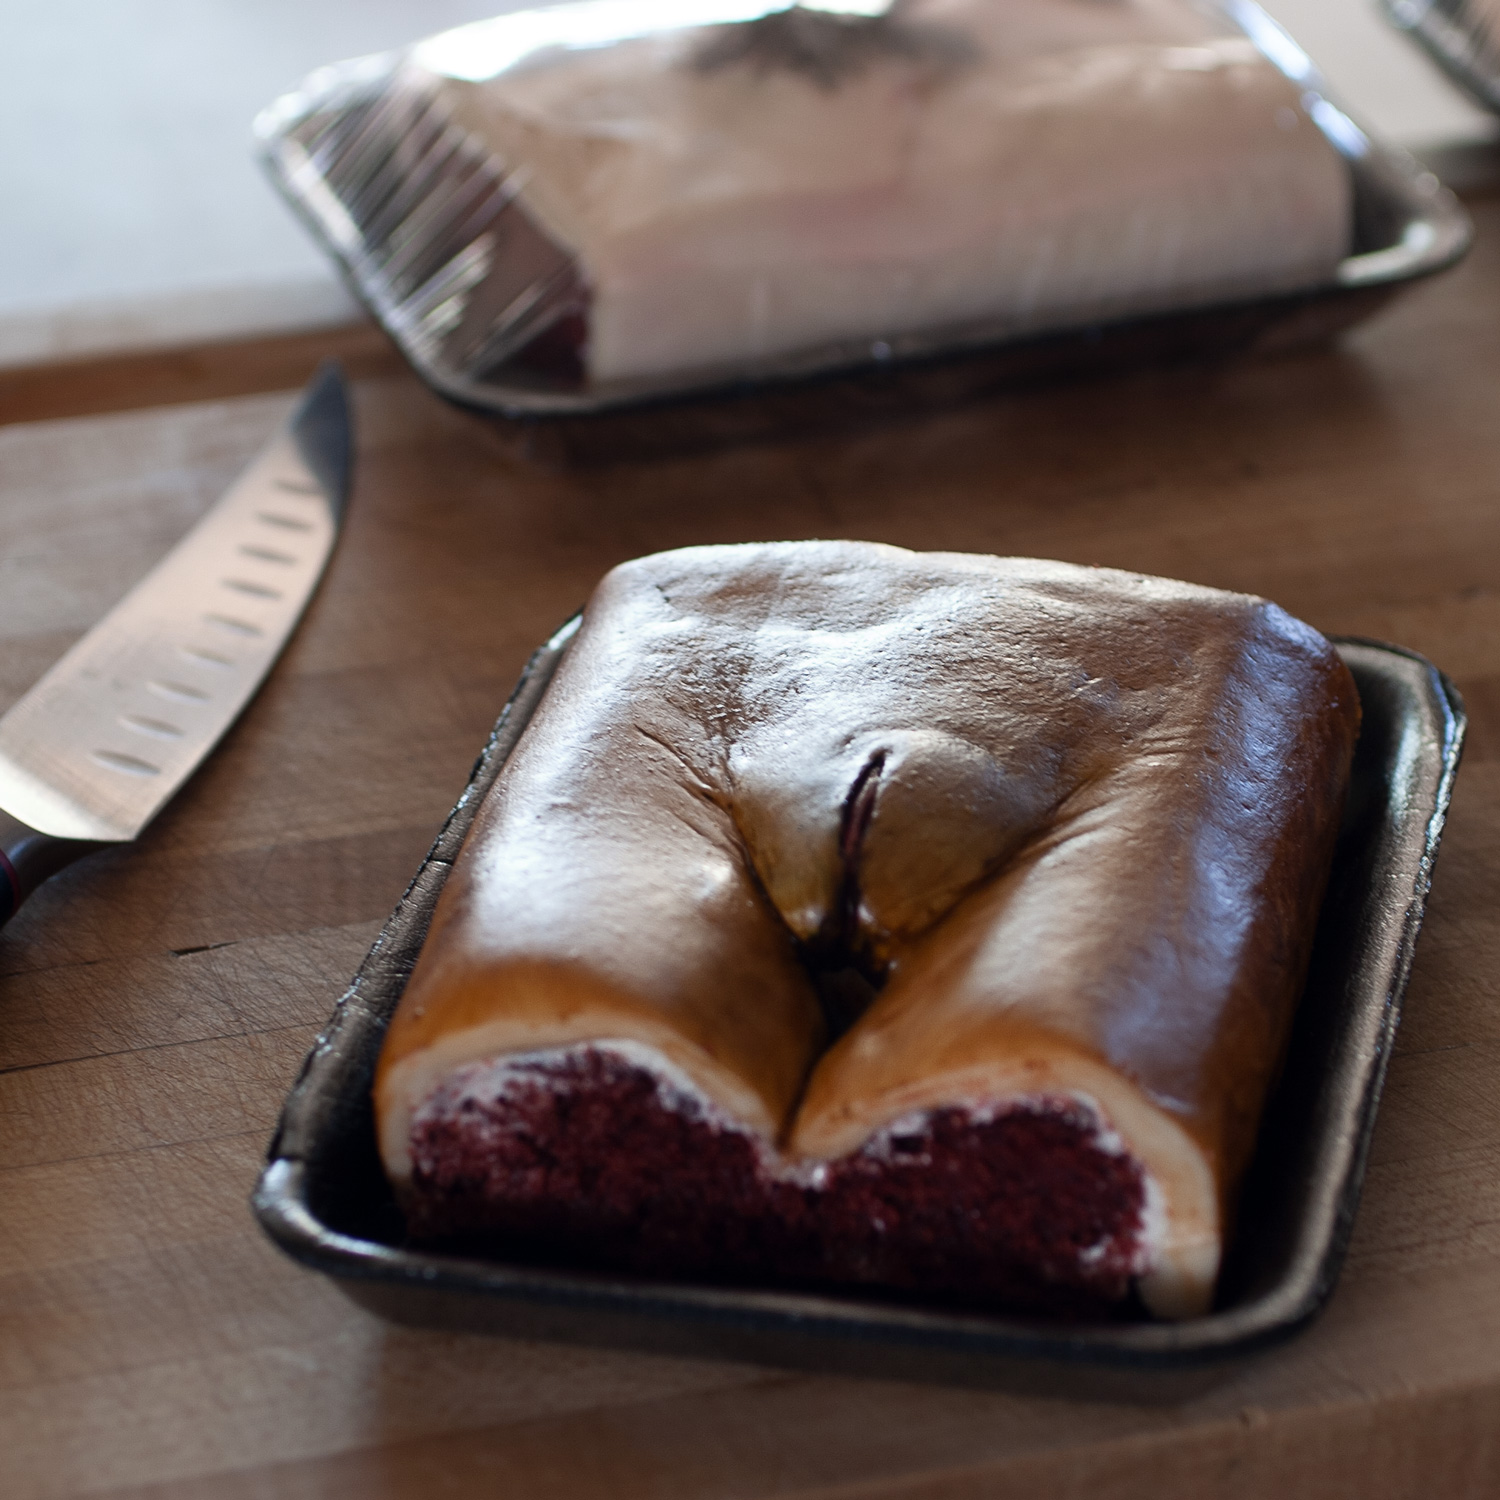 Red velvet cake in a black styrofoam meat tray. The cake is decorated to look like a realistic human vulva with brown skin. In the background is another vulva cake and a boning knife. 